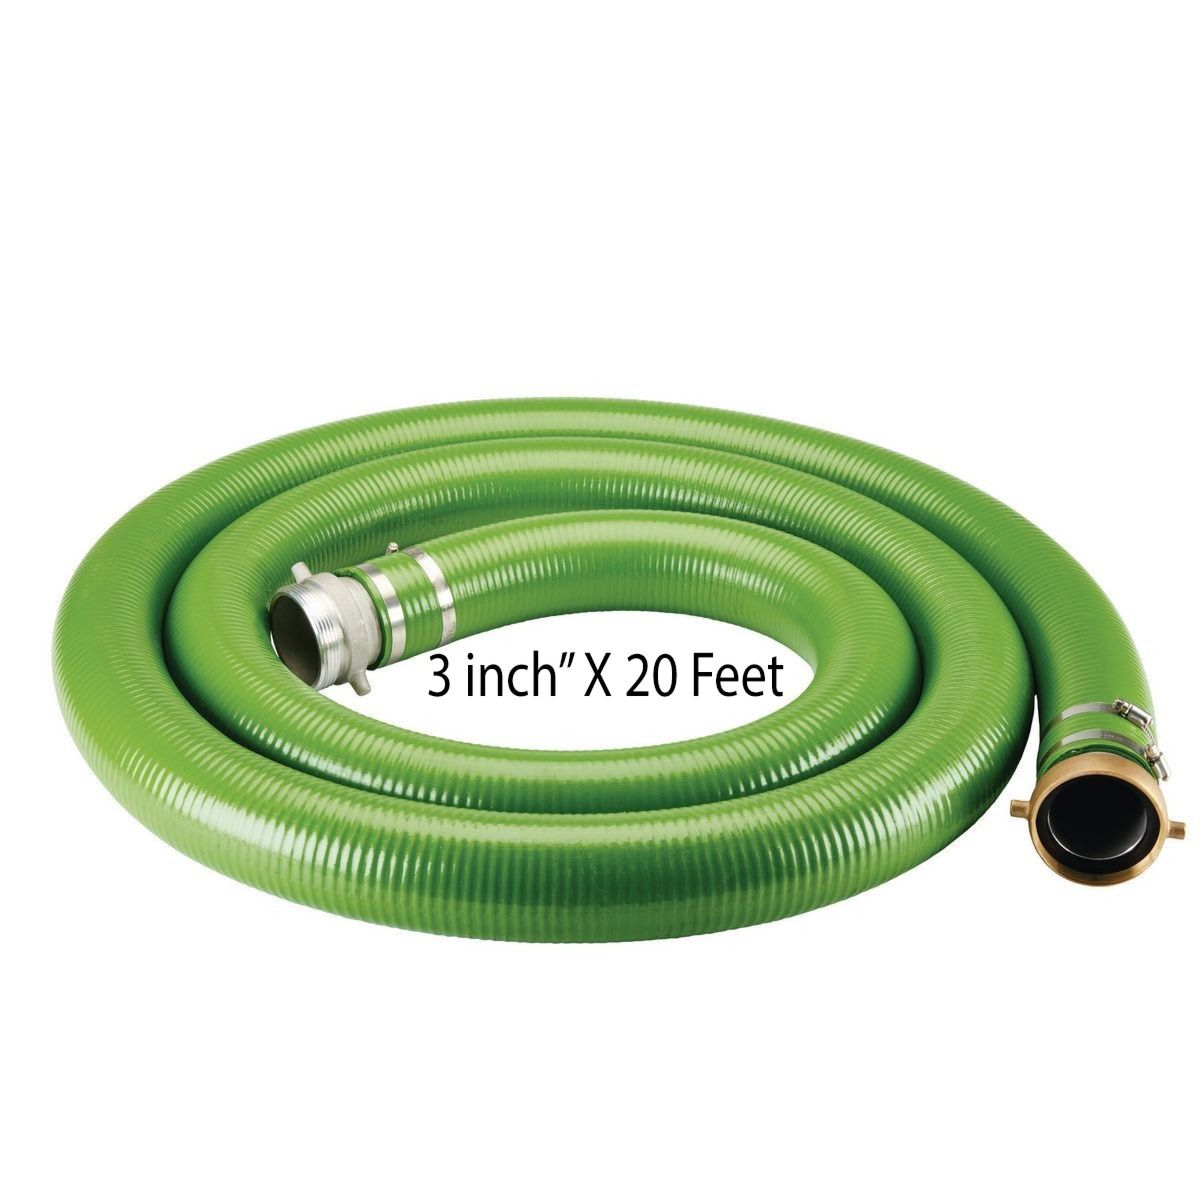 3" PVC WATER SUCTION HOSE 20 FT 